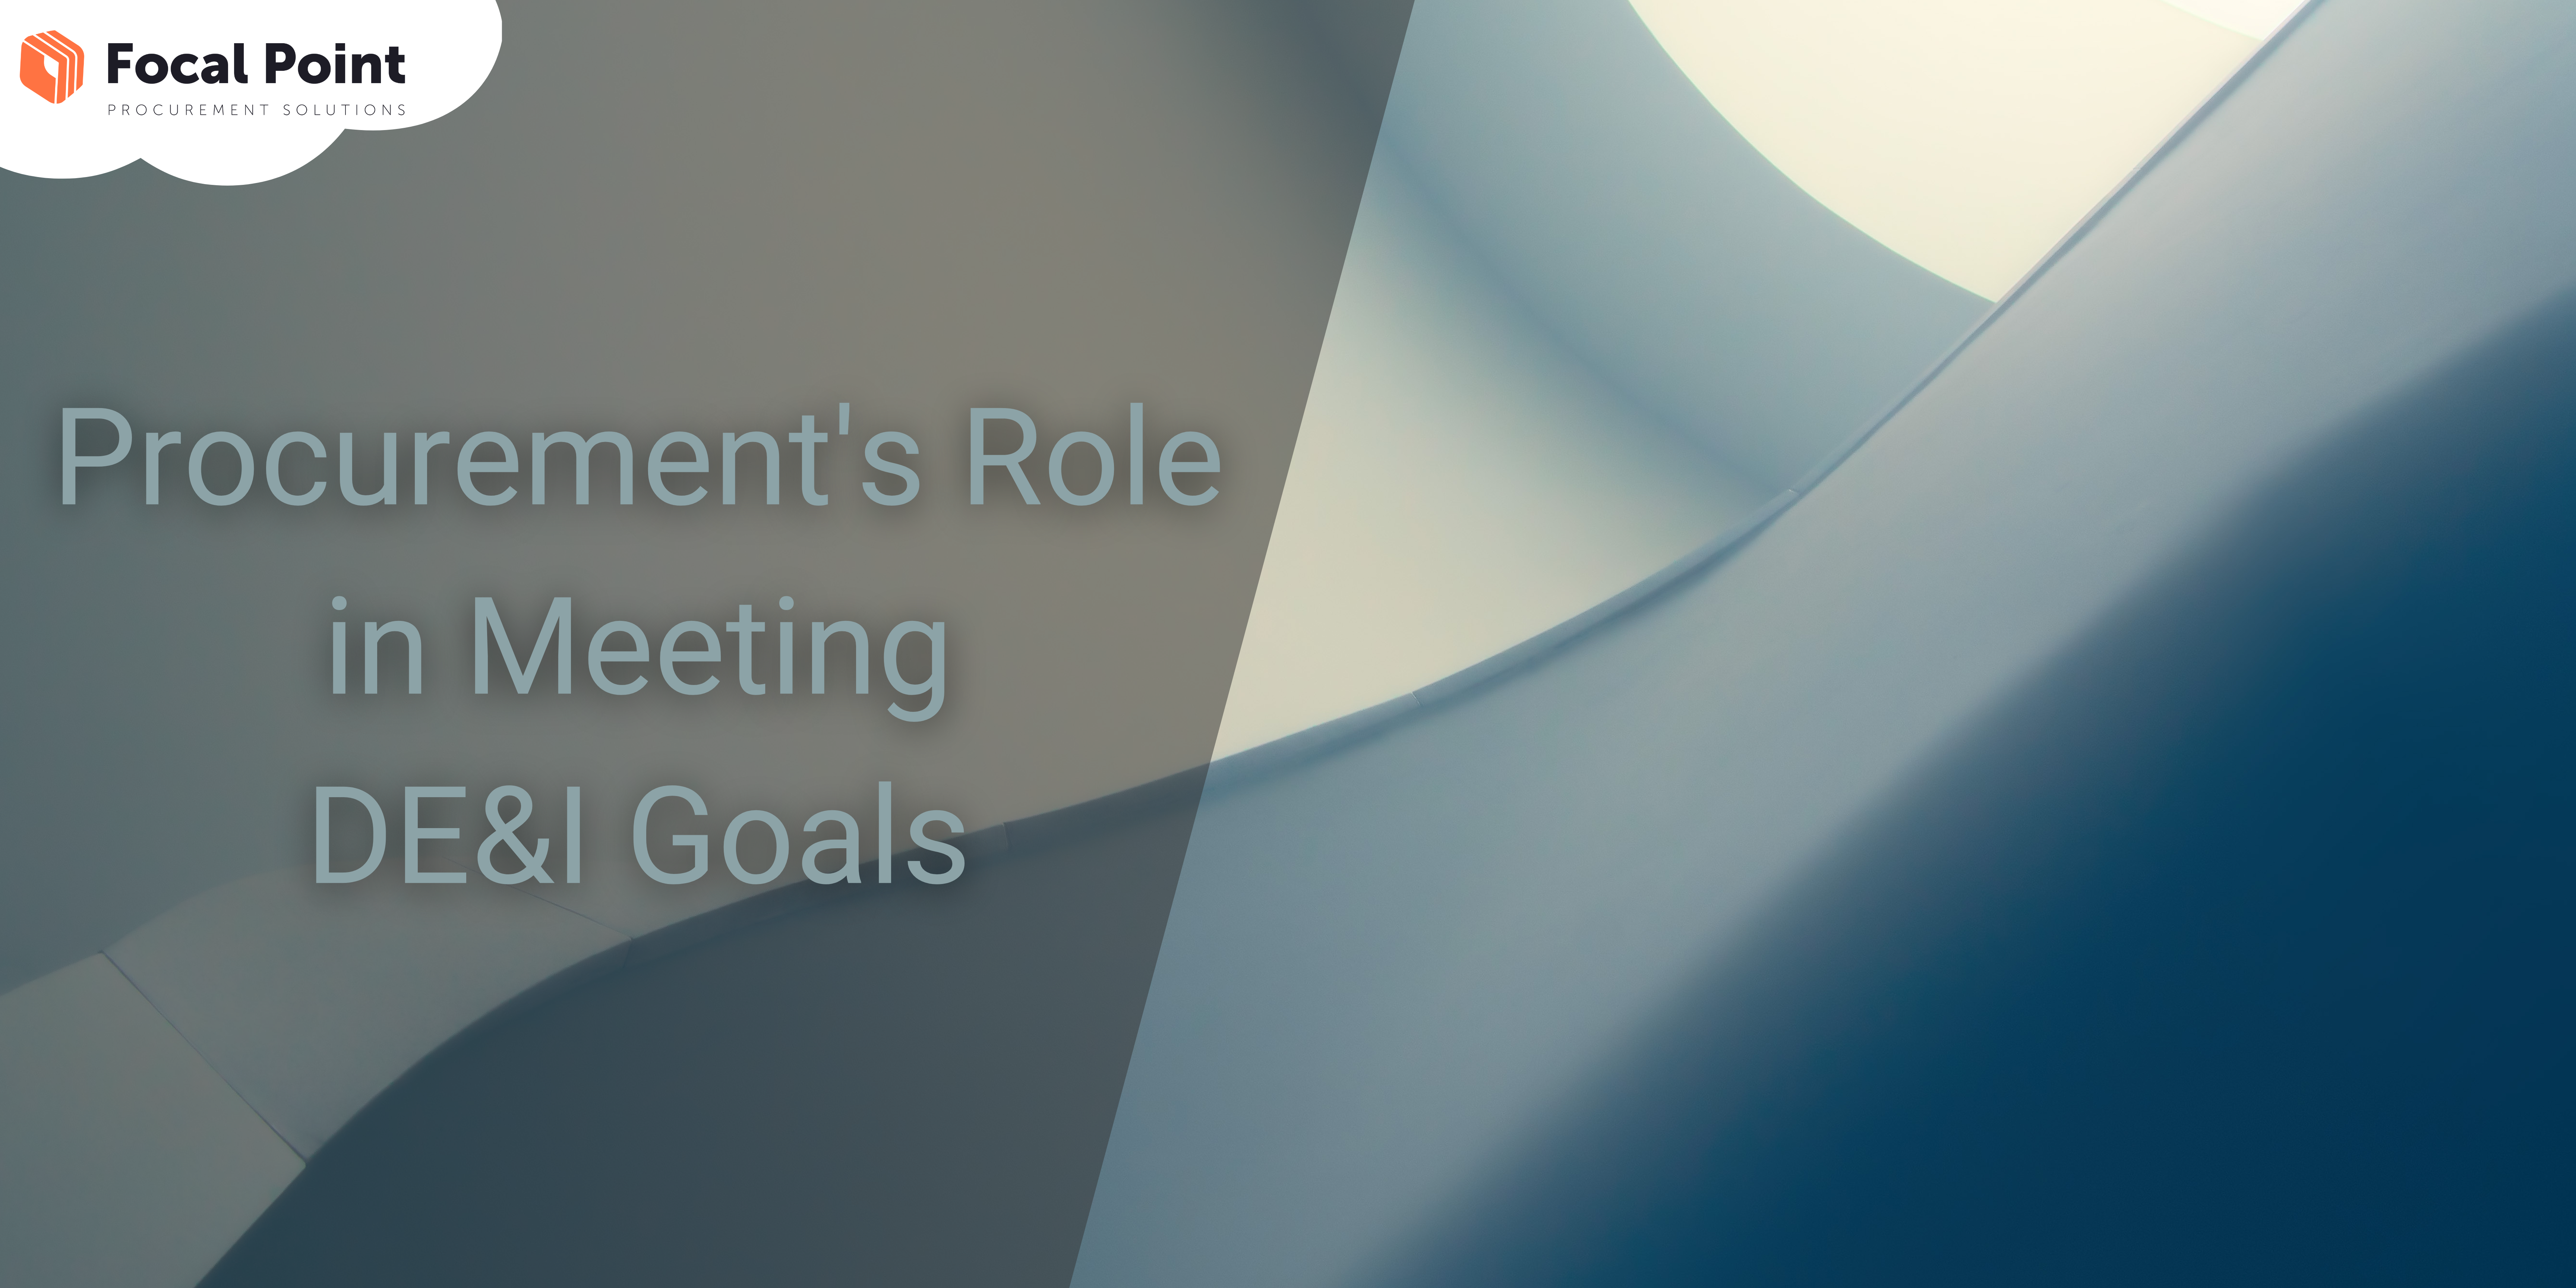 procurements-role-in-meeting-dei-goals-focal-point